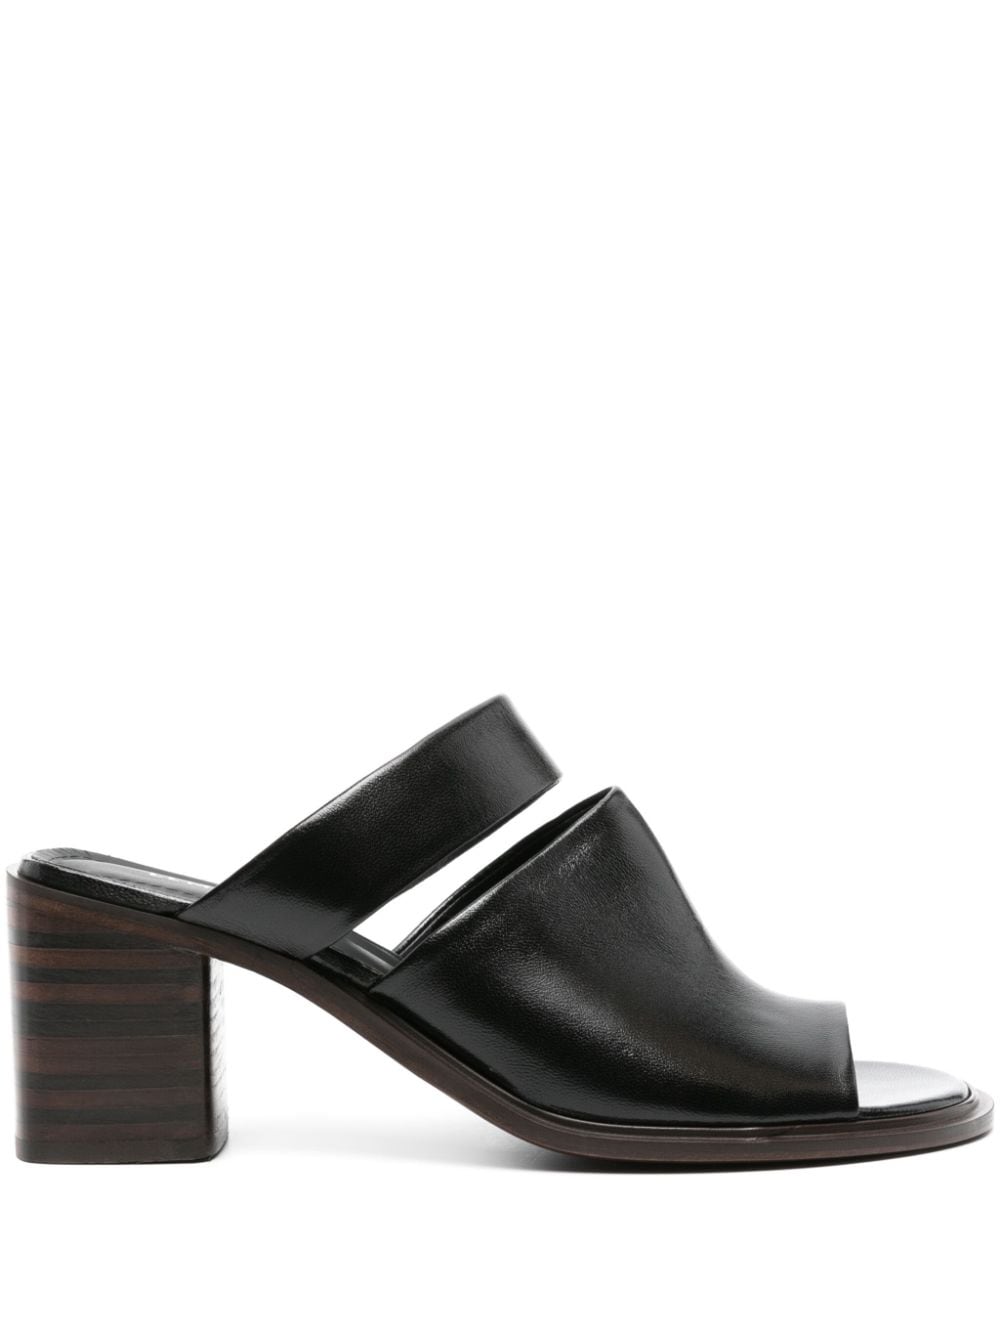 LEMAIRE DOUBLE STRAP 55MM LEATHER MULES